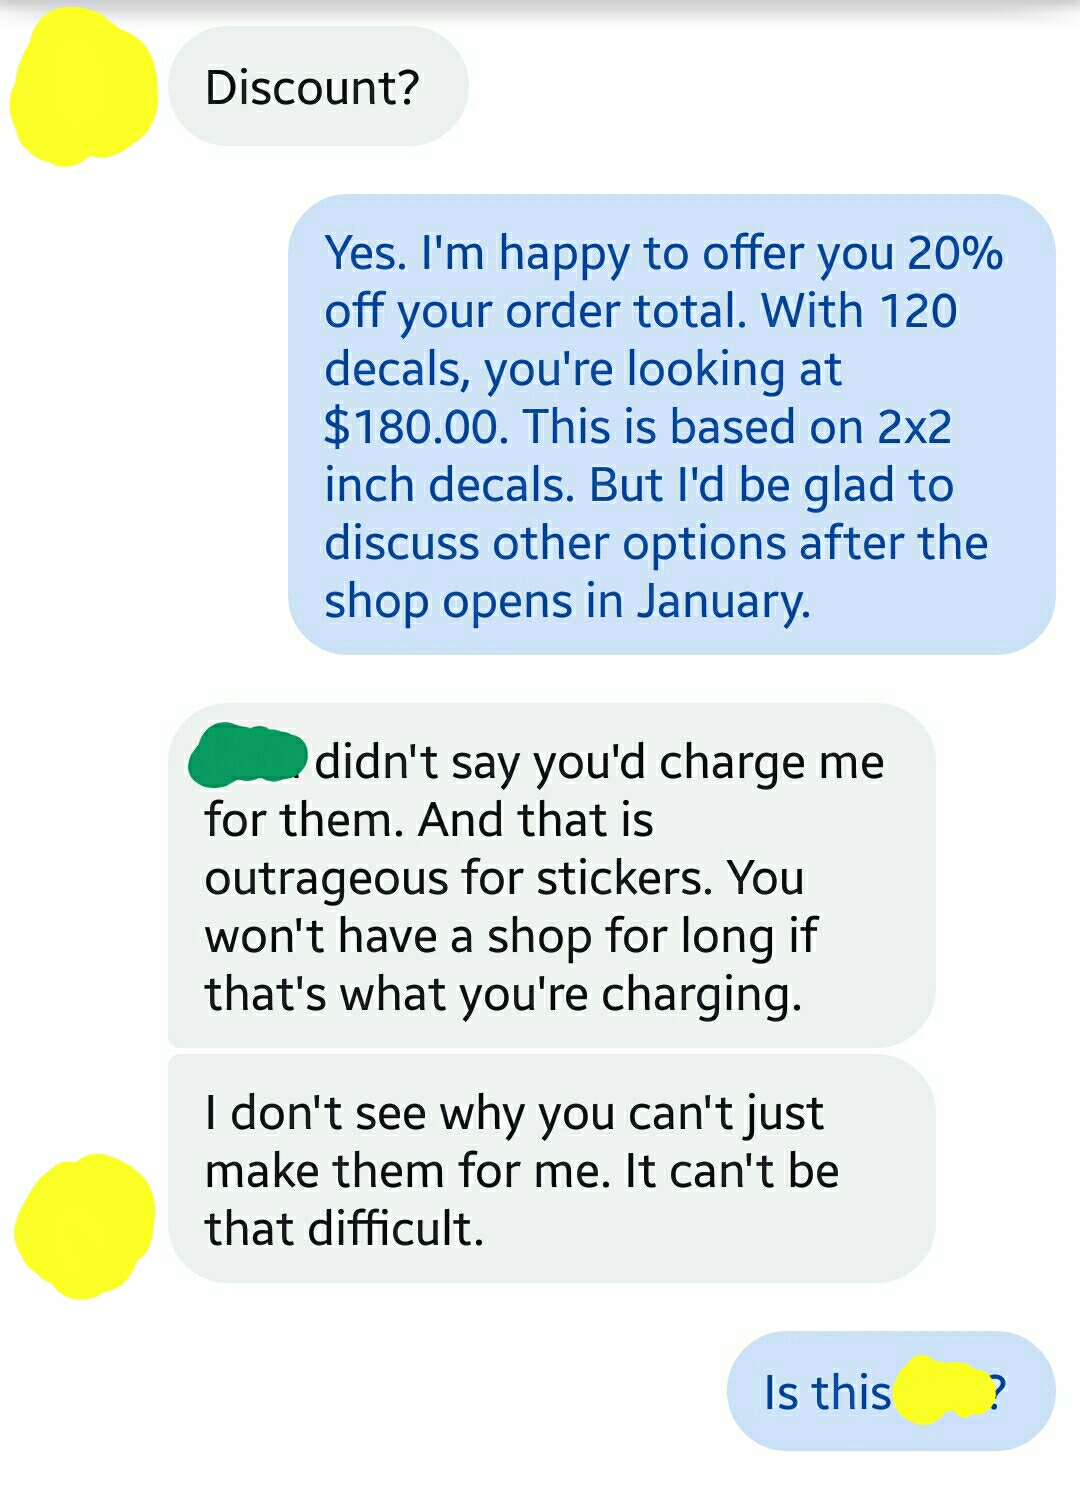 Entitled Teacher Flips Out Over Not Getting Free Decals, Promptly Gets Put In Her Place